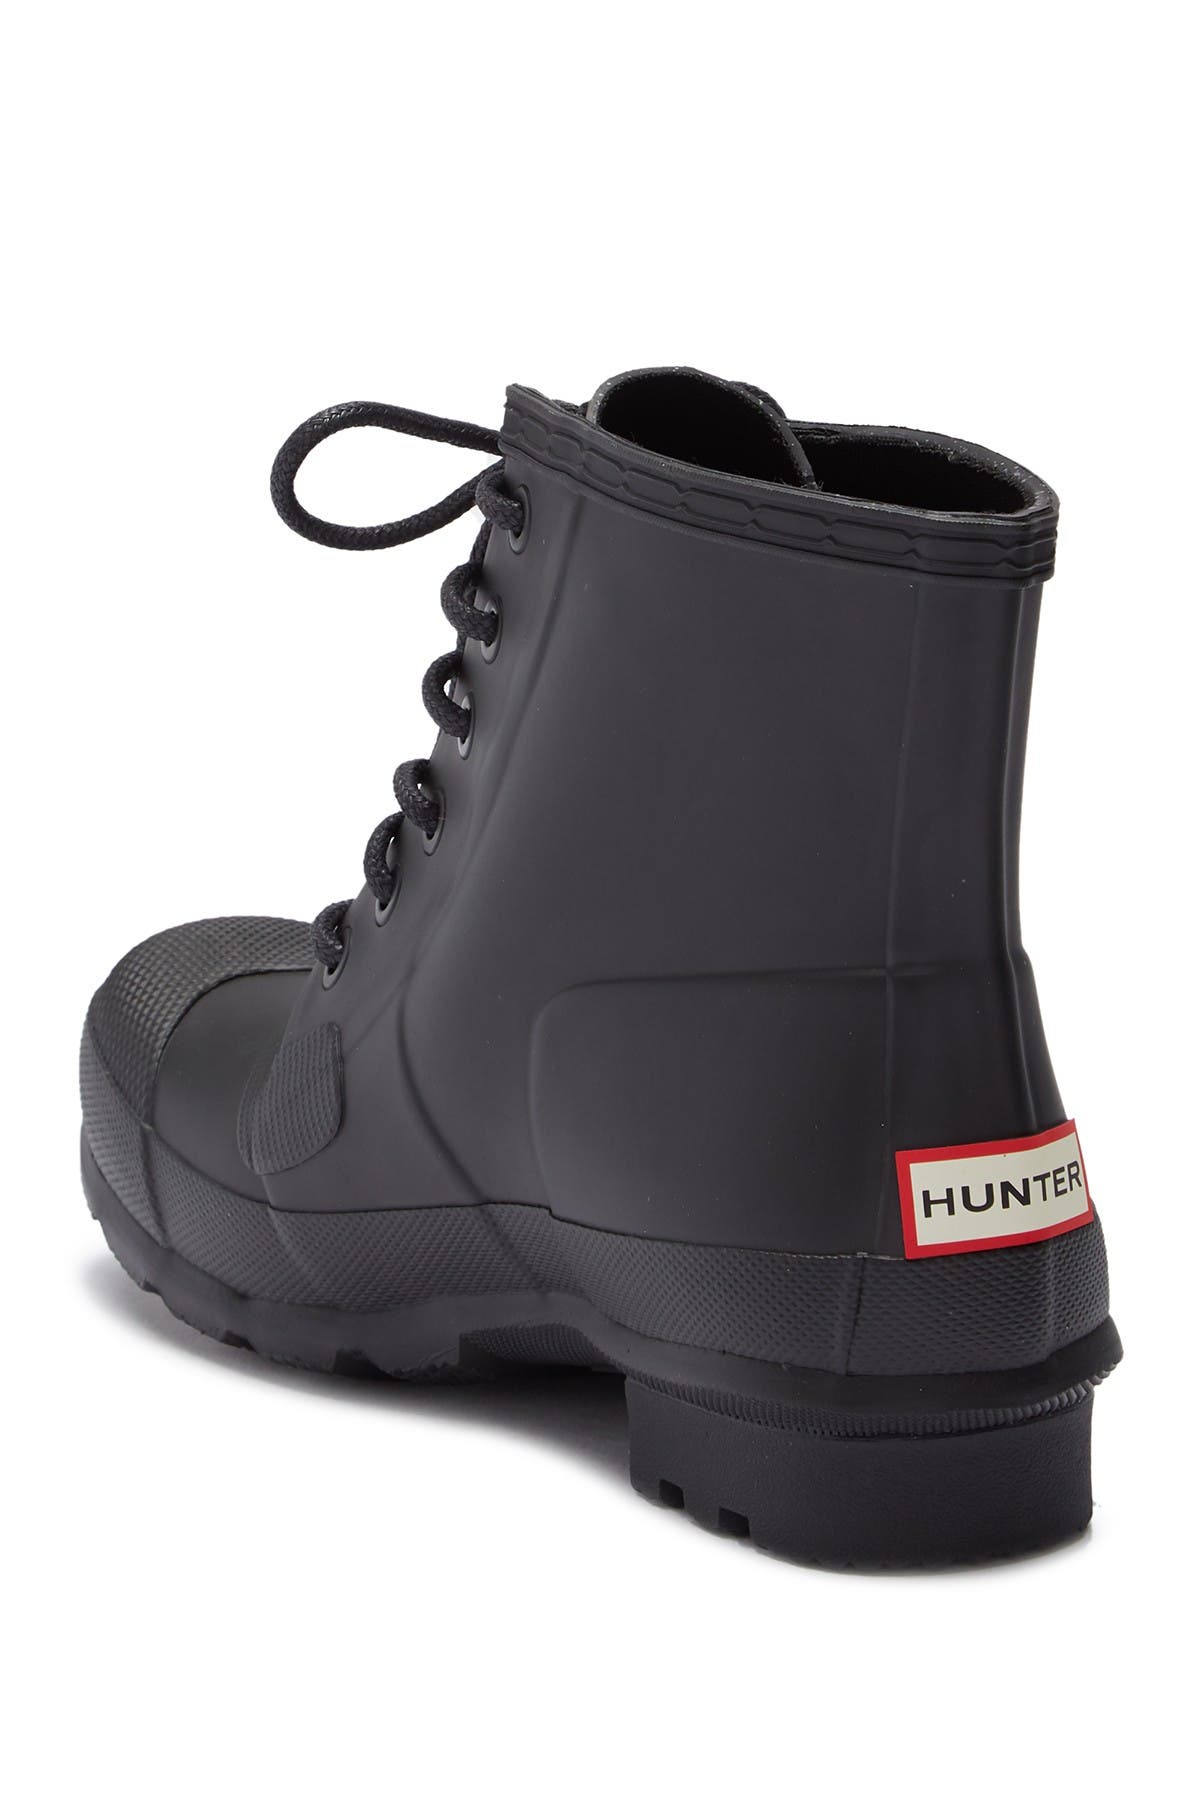 hunter rain boots with laces